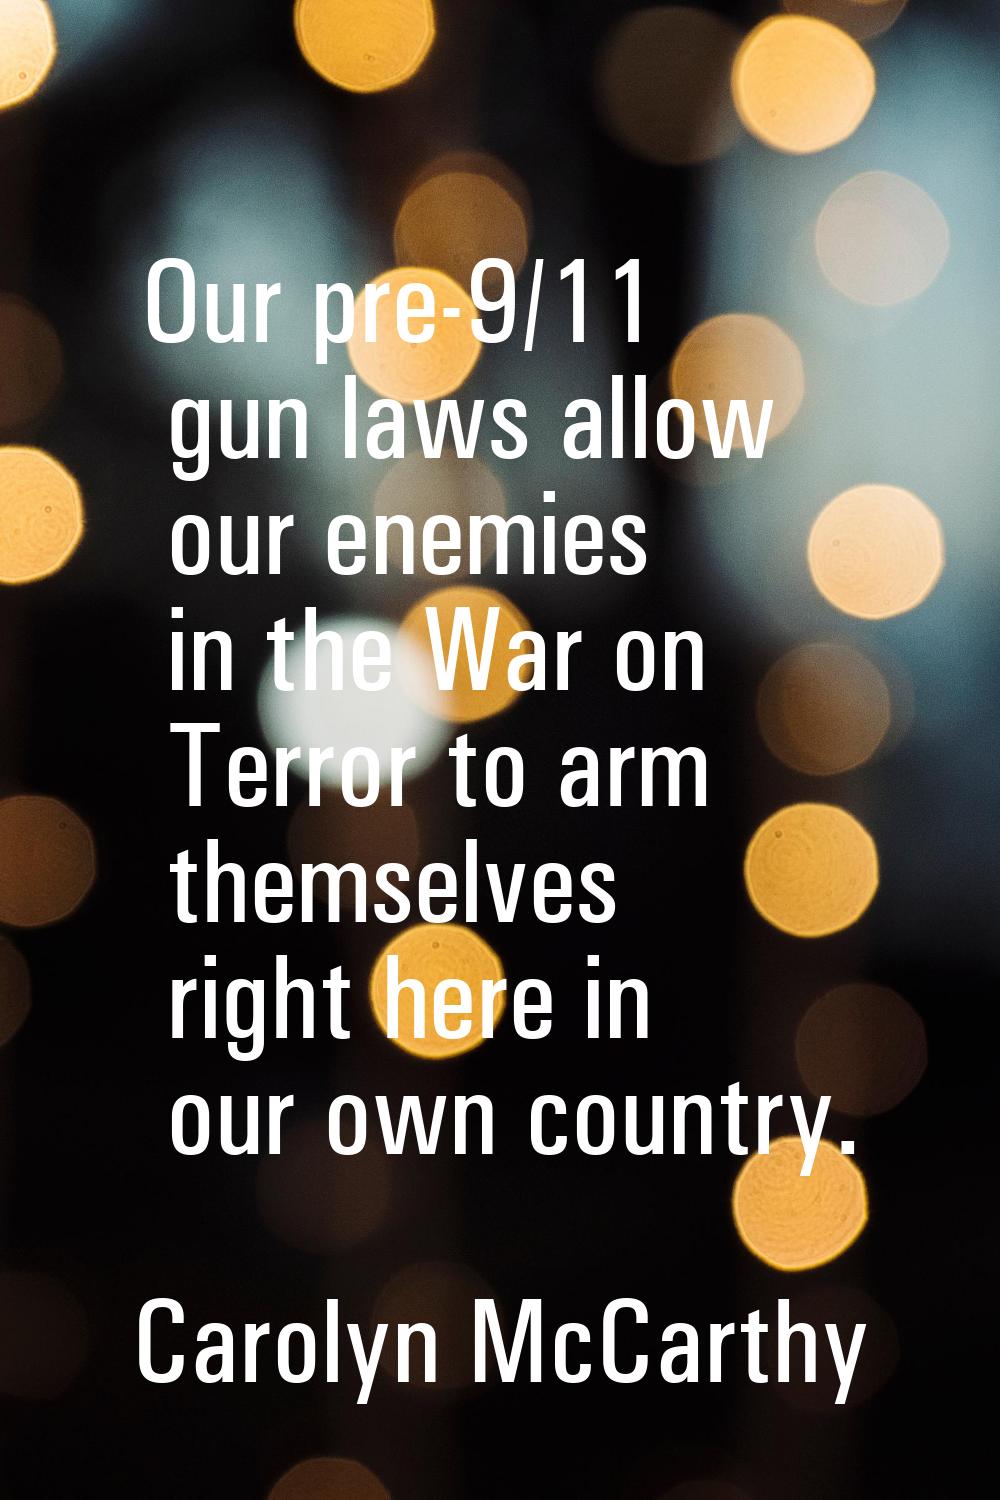 Our pre-9/11 gun laws allow our enemies in the War on Terror to arm themselves right here in our ow